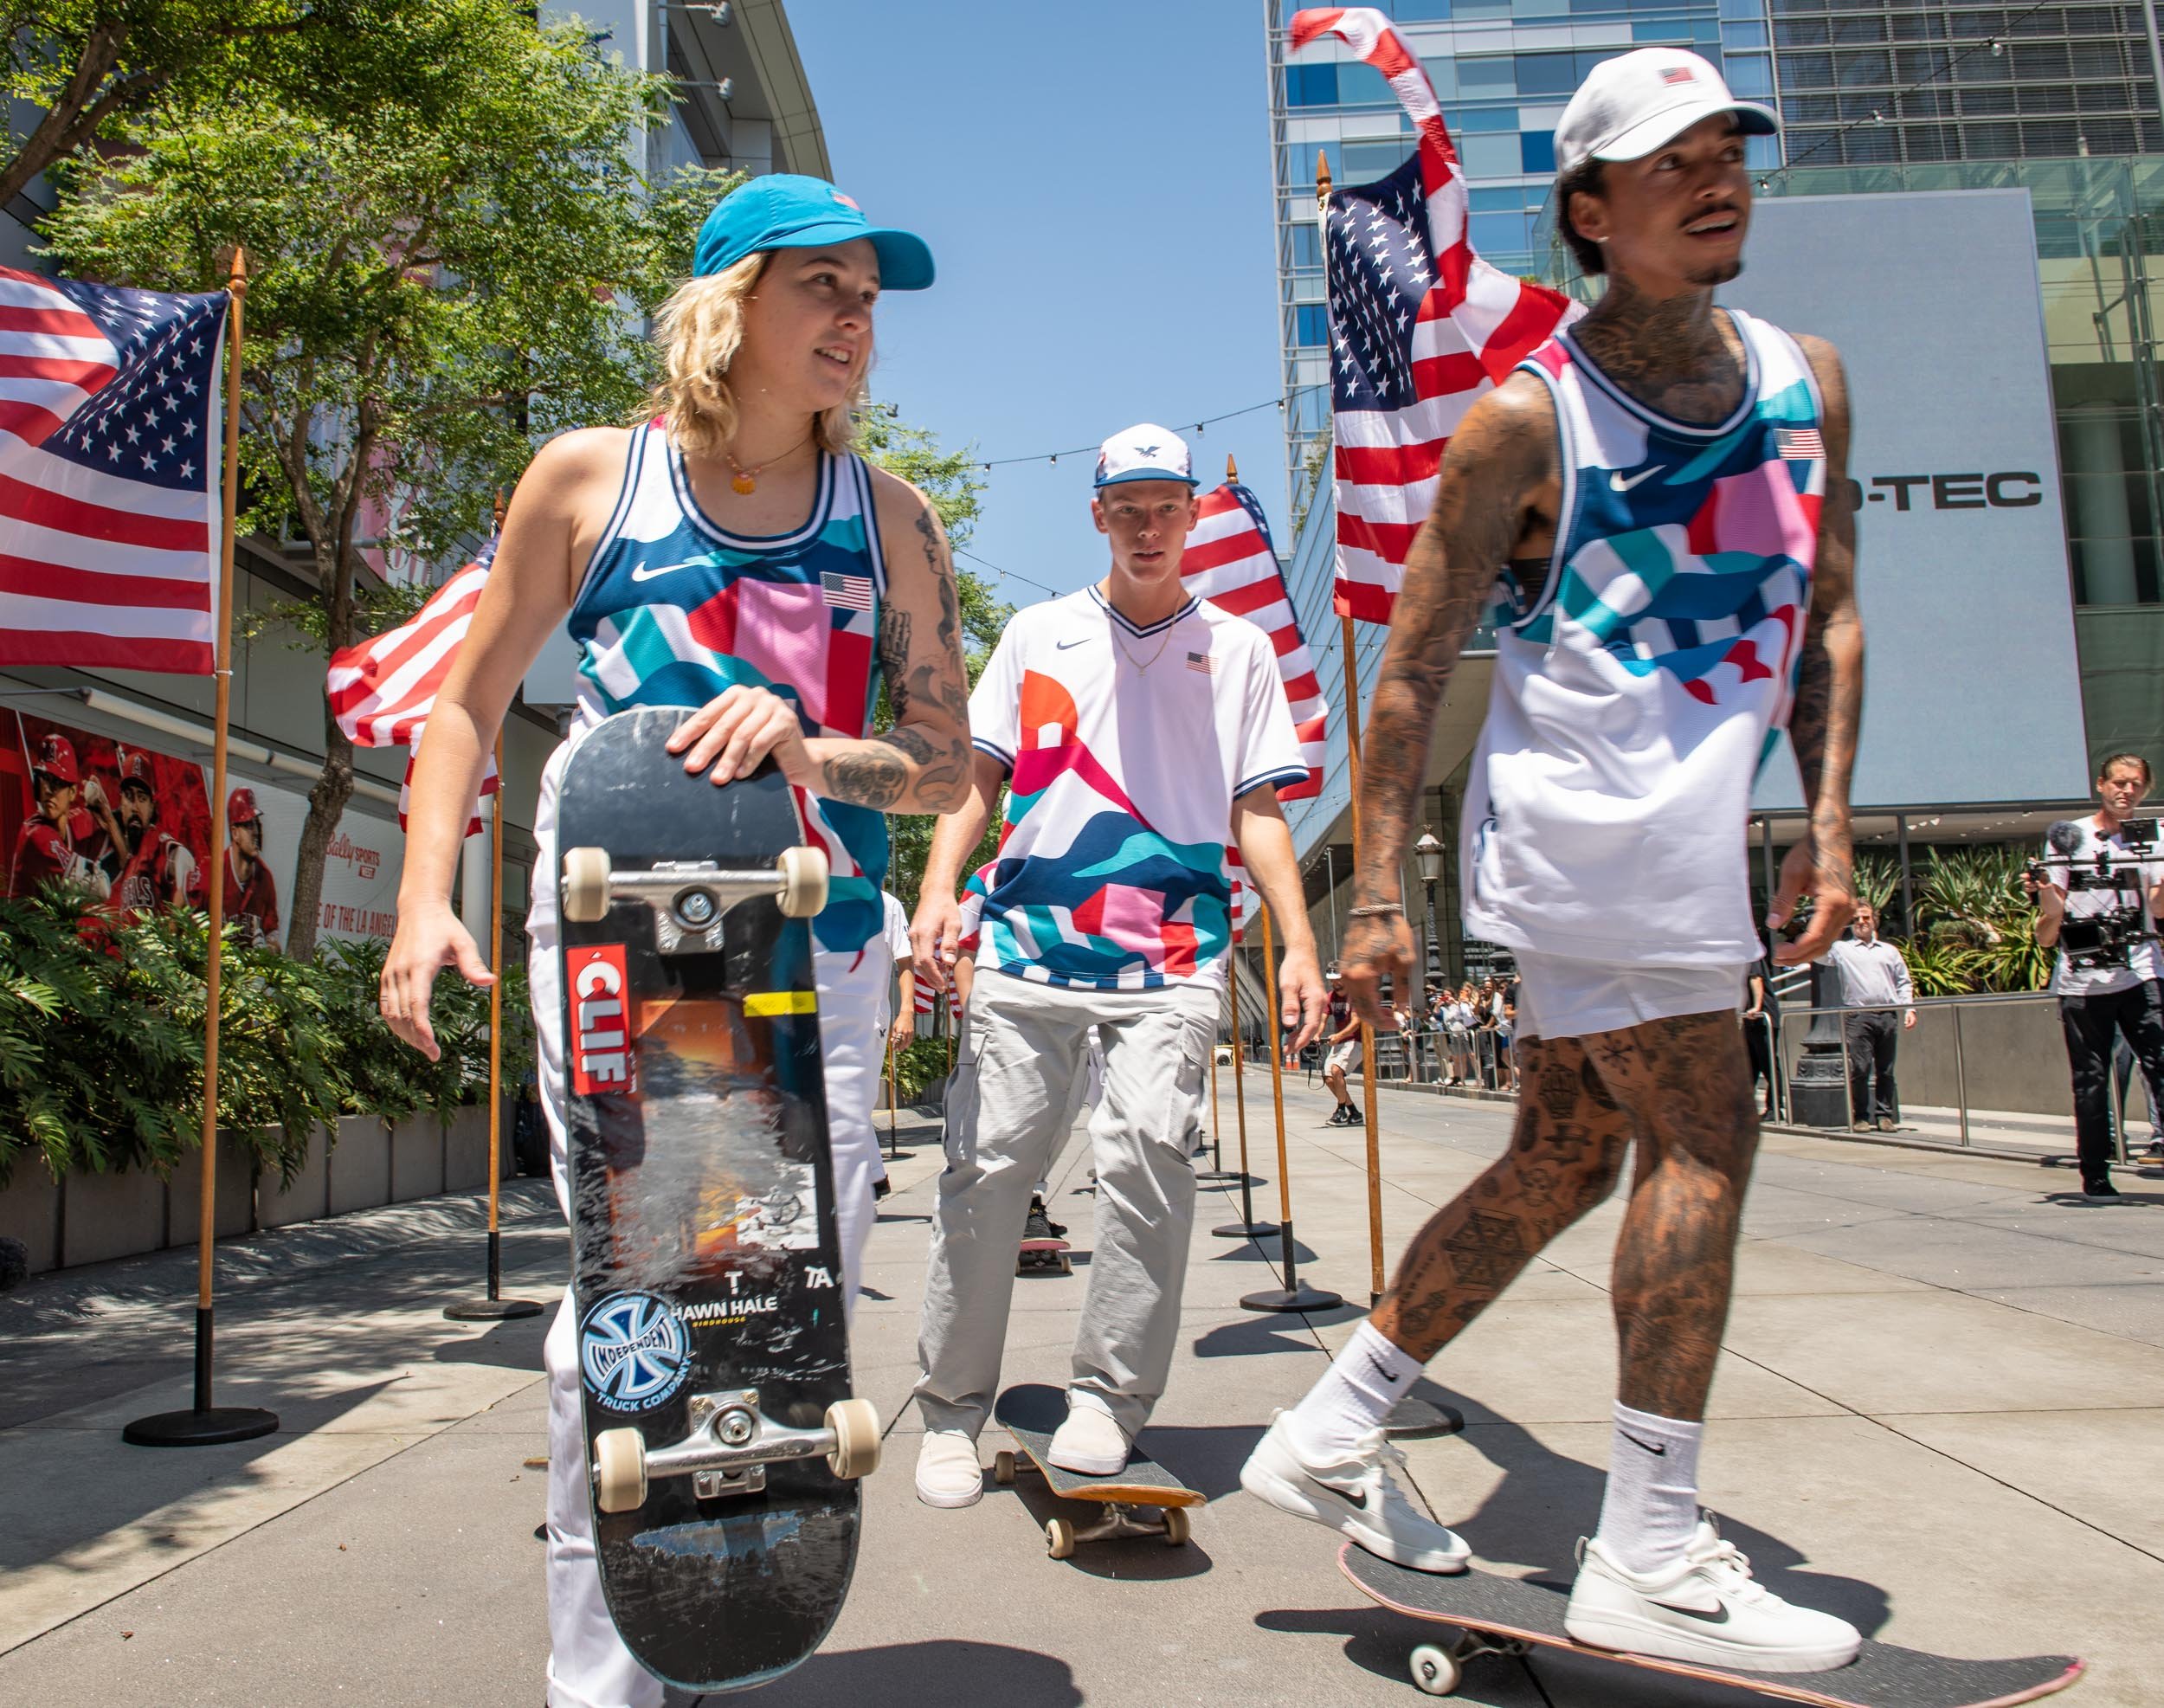 How Do You Qualify in Skateboarding For The 2024 Paris Olympics? — Girl